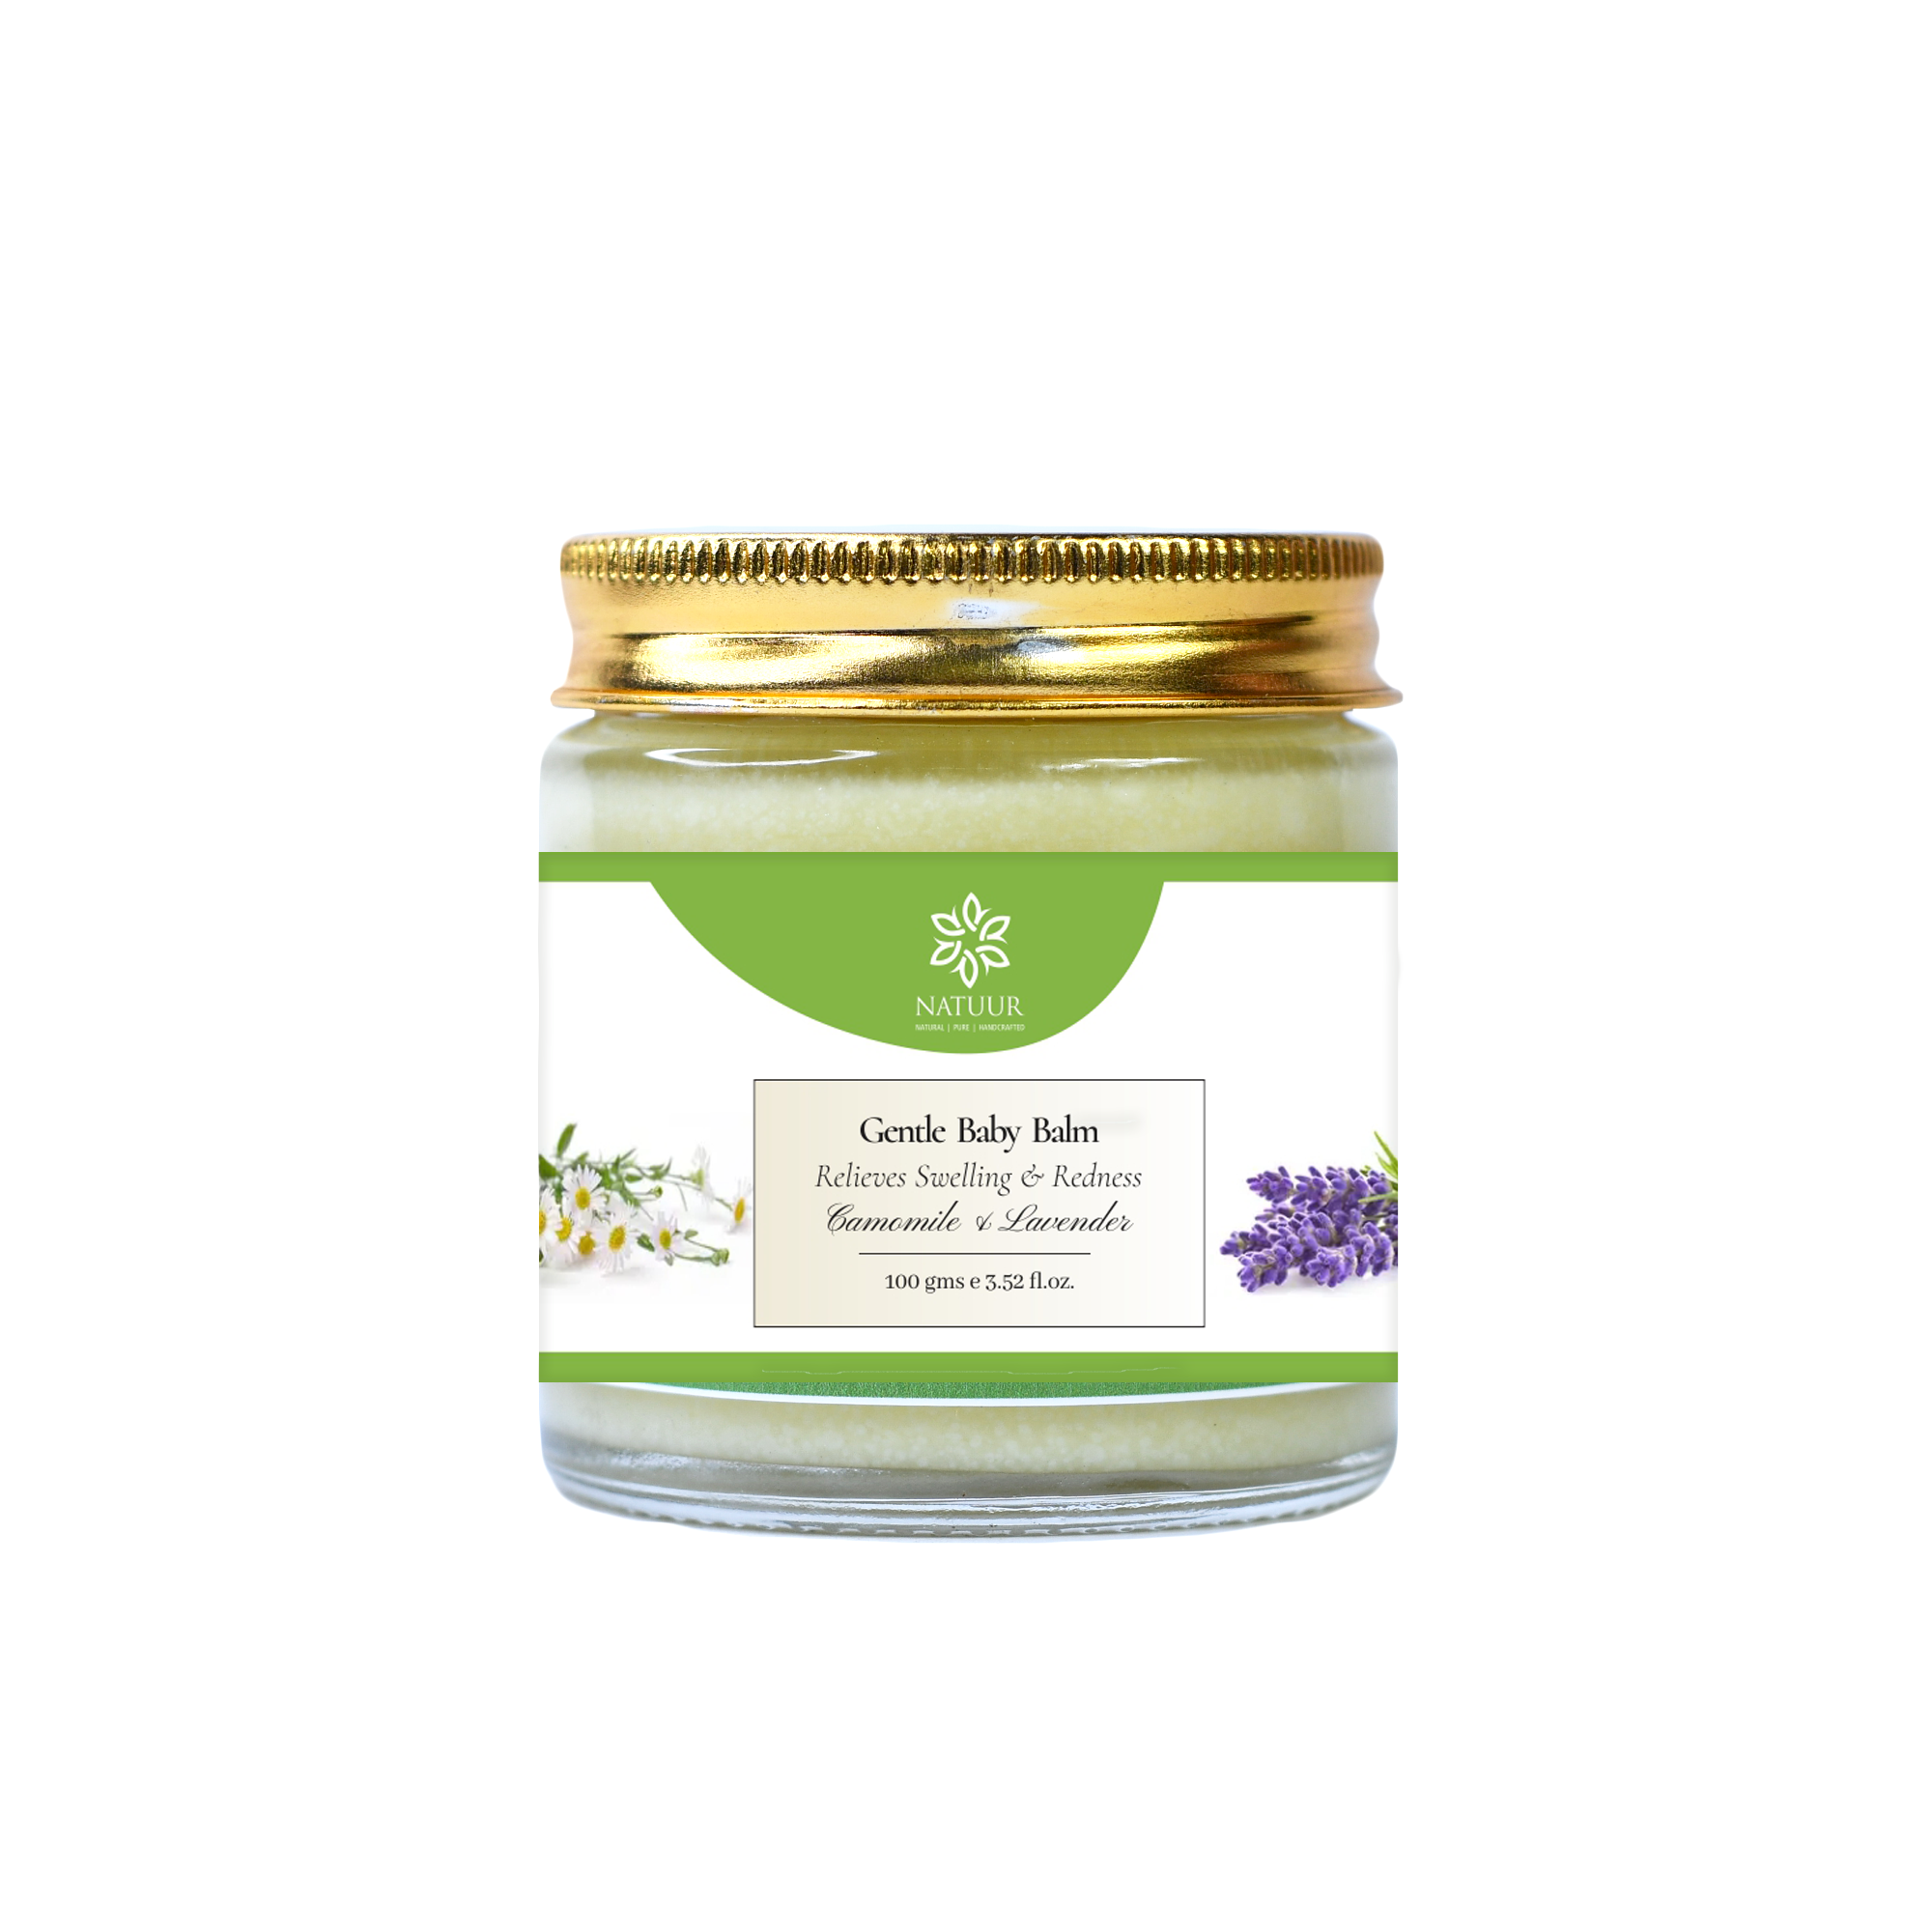 Healofy Naturals Baby Sleep Balm, 80gm, Made with 100% Natural Oils,  Soothing & Calming Balm - Buy Baby Care Products in India